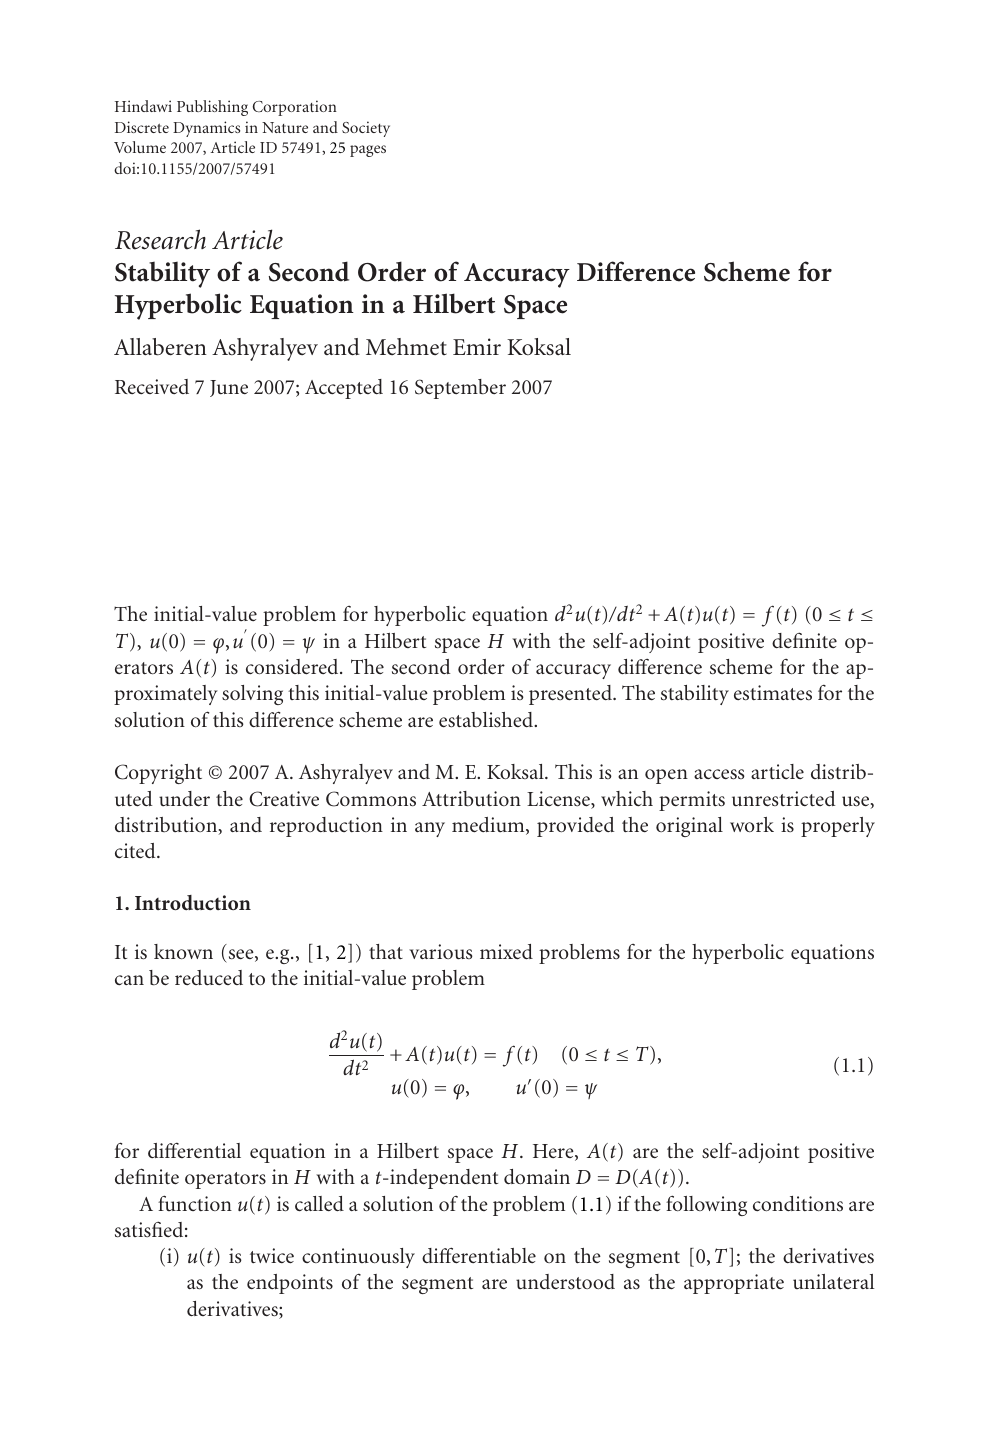 Stability Of A Second Order Of Accuracy Difference Scheme For Hyperbolic Equation In A Hilbert Space Topic Of Research Paper In Mathematics Download Scholarly Article Pdf And Read For Free On